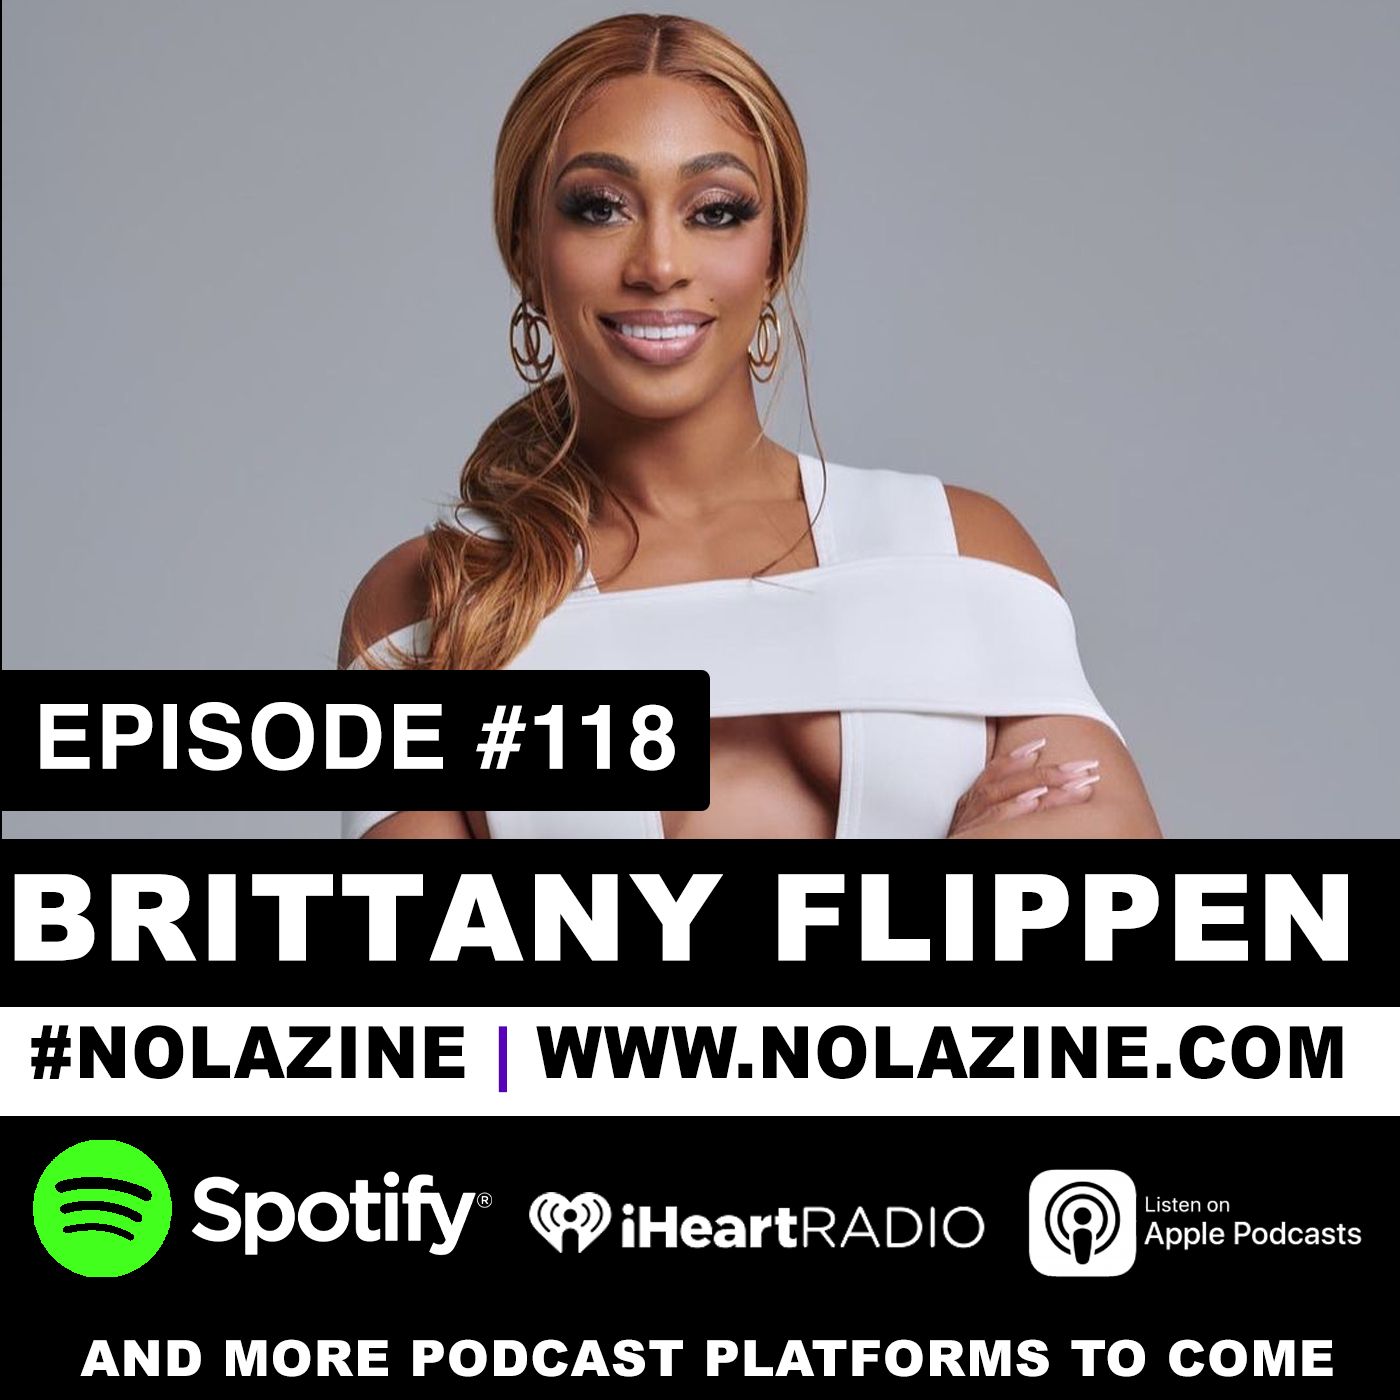 EP: 118 Featuring Brittany Flippen